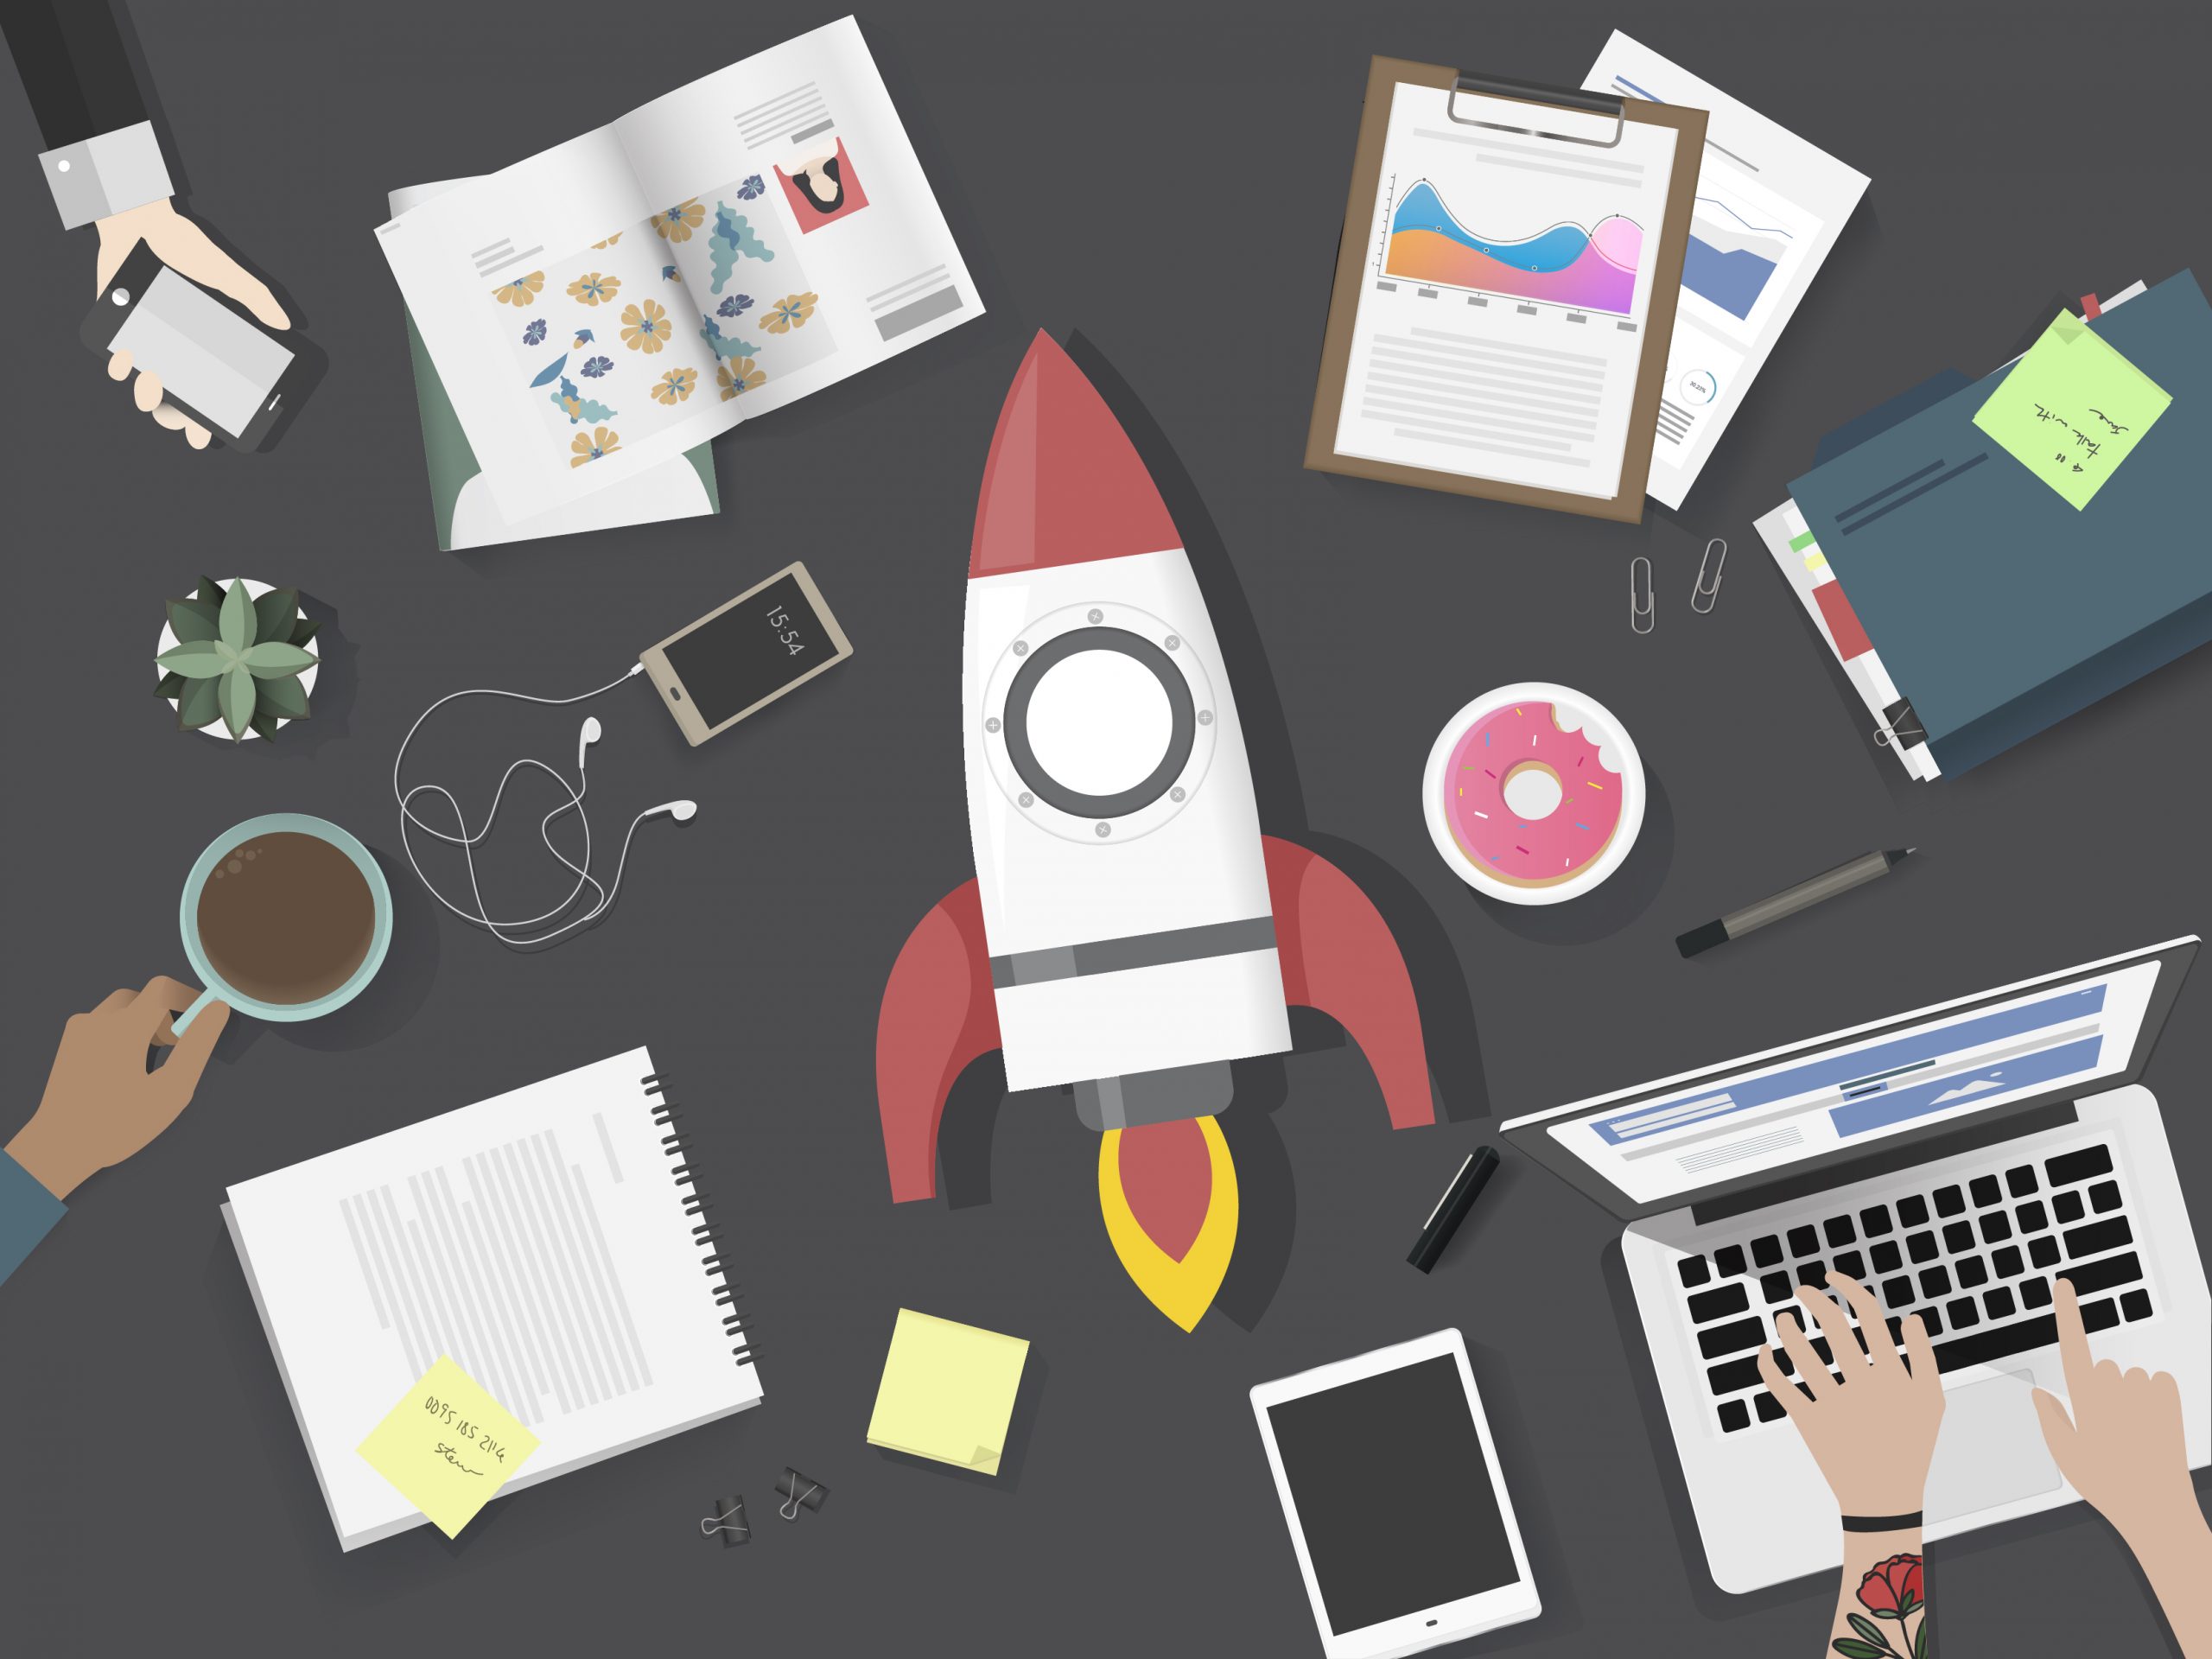 Tools that empower your startup